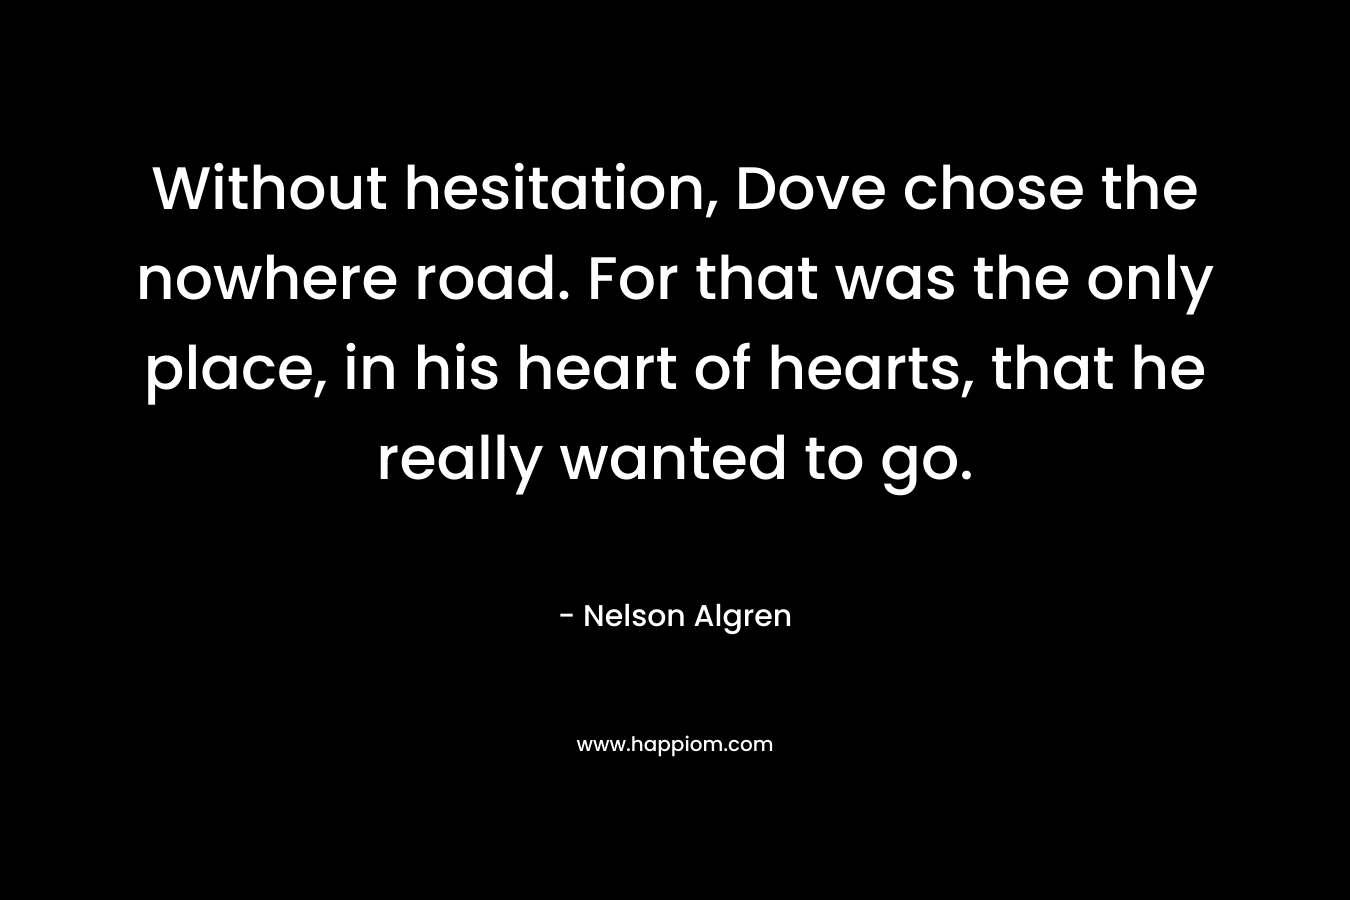 Without hesitation, Dove chose the nowhere road. For that was the only place, in his heart of hearts, that he really wanted to go. – Nelson Algren